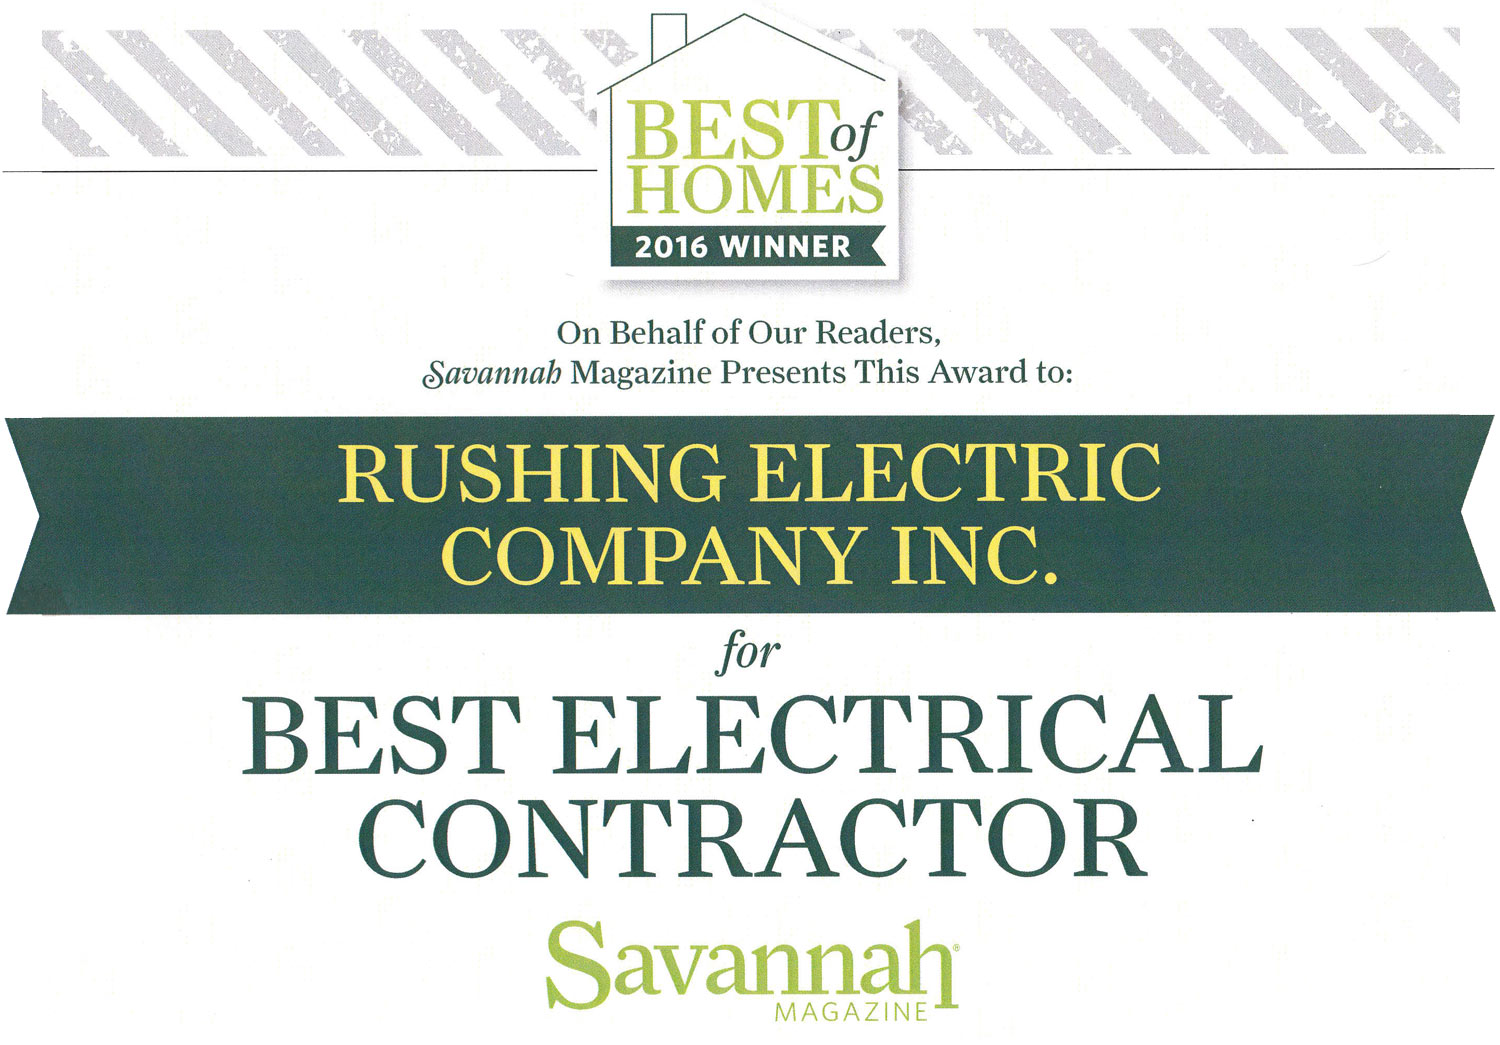 rushing electric co inc named best electrical contractor in savannah